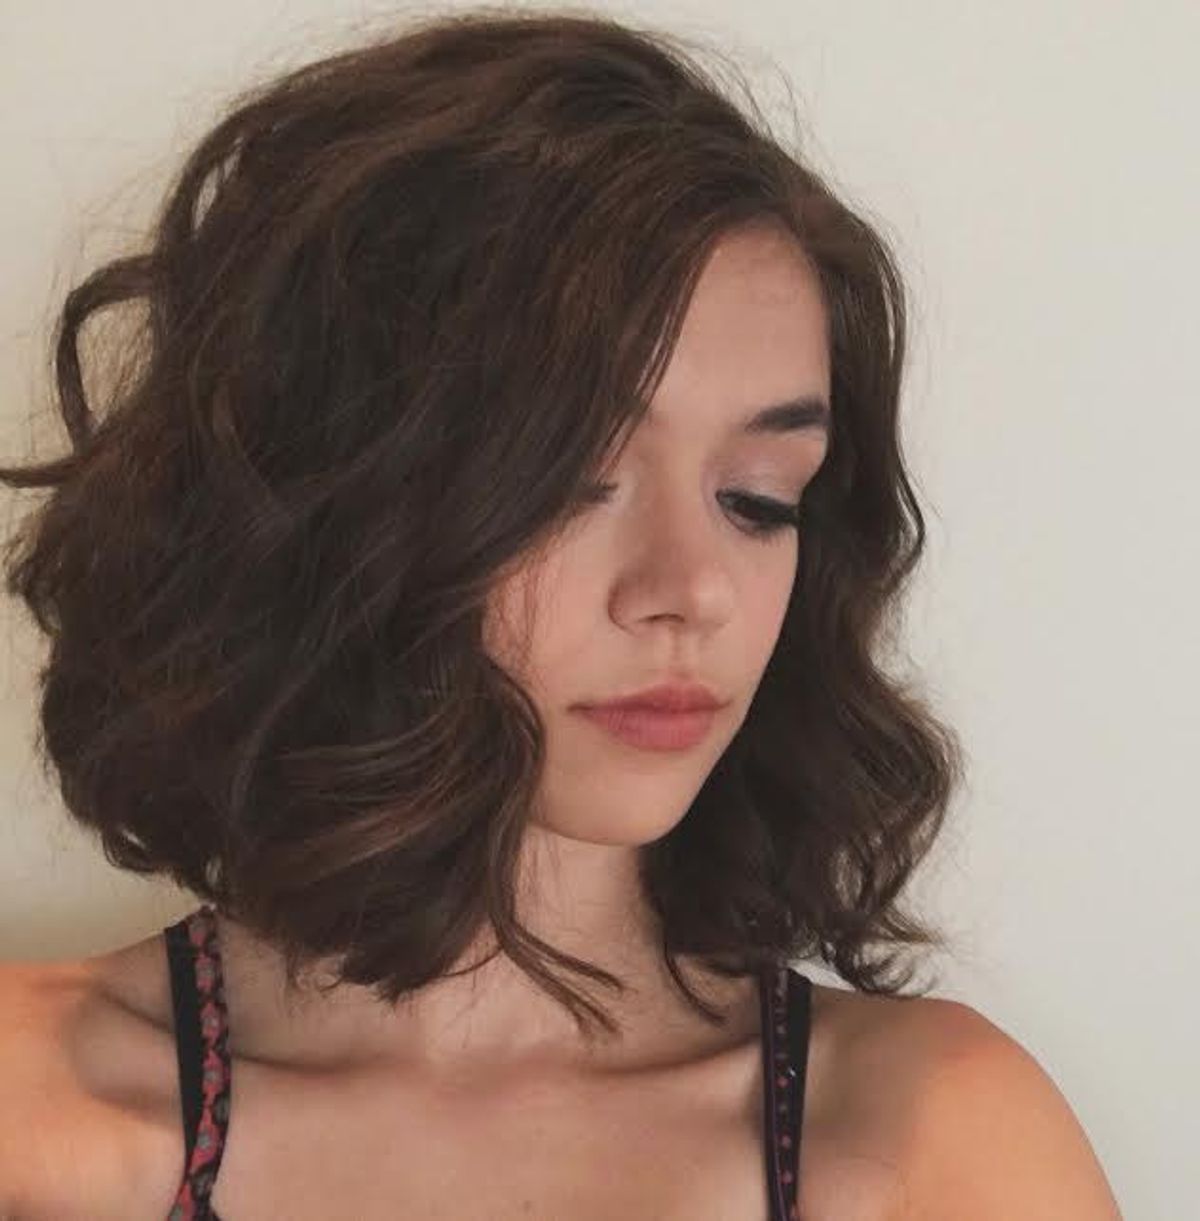 5 Reasons To Cut Your Hair Short